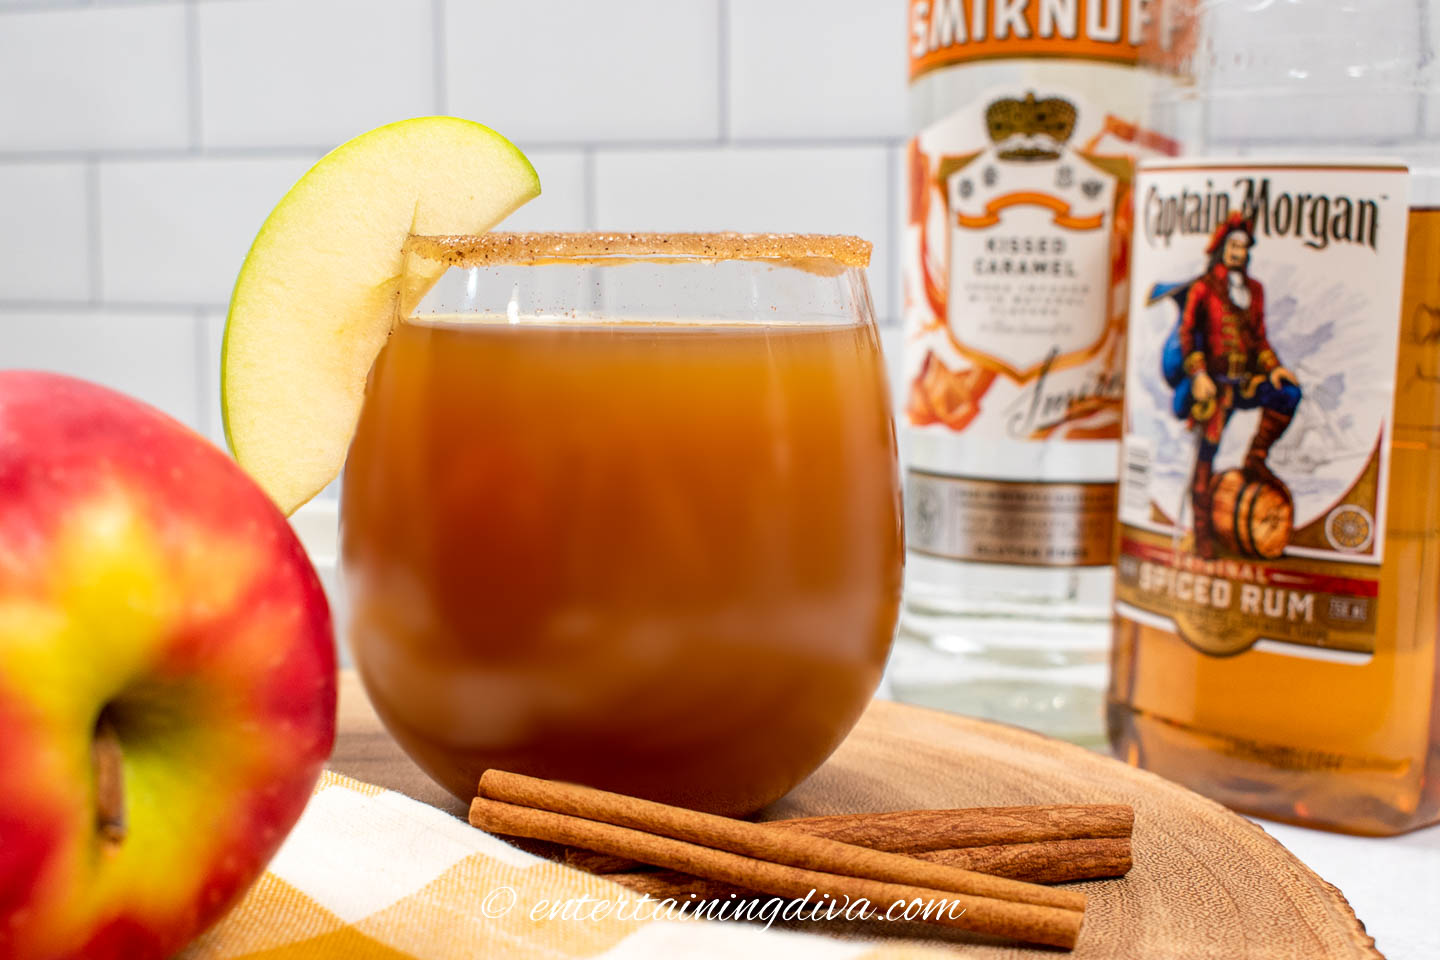 spiked caramel apple cider in a glass with spiced rum and caramel vodka bottles in the background